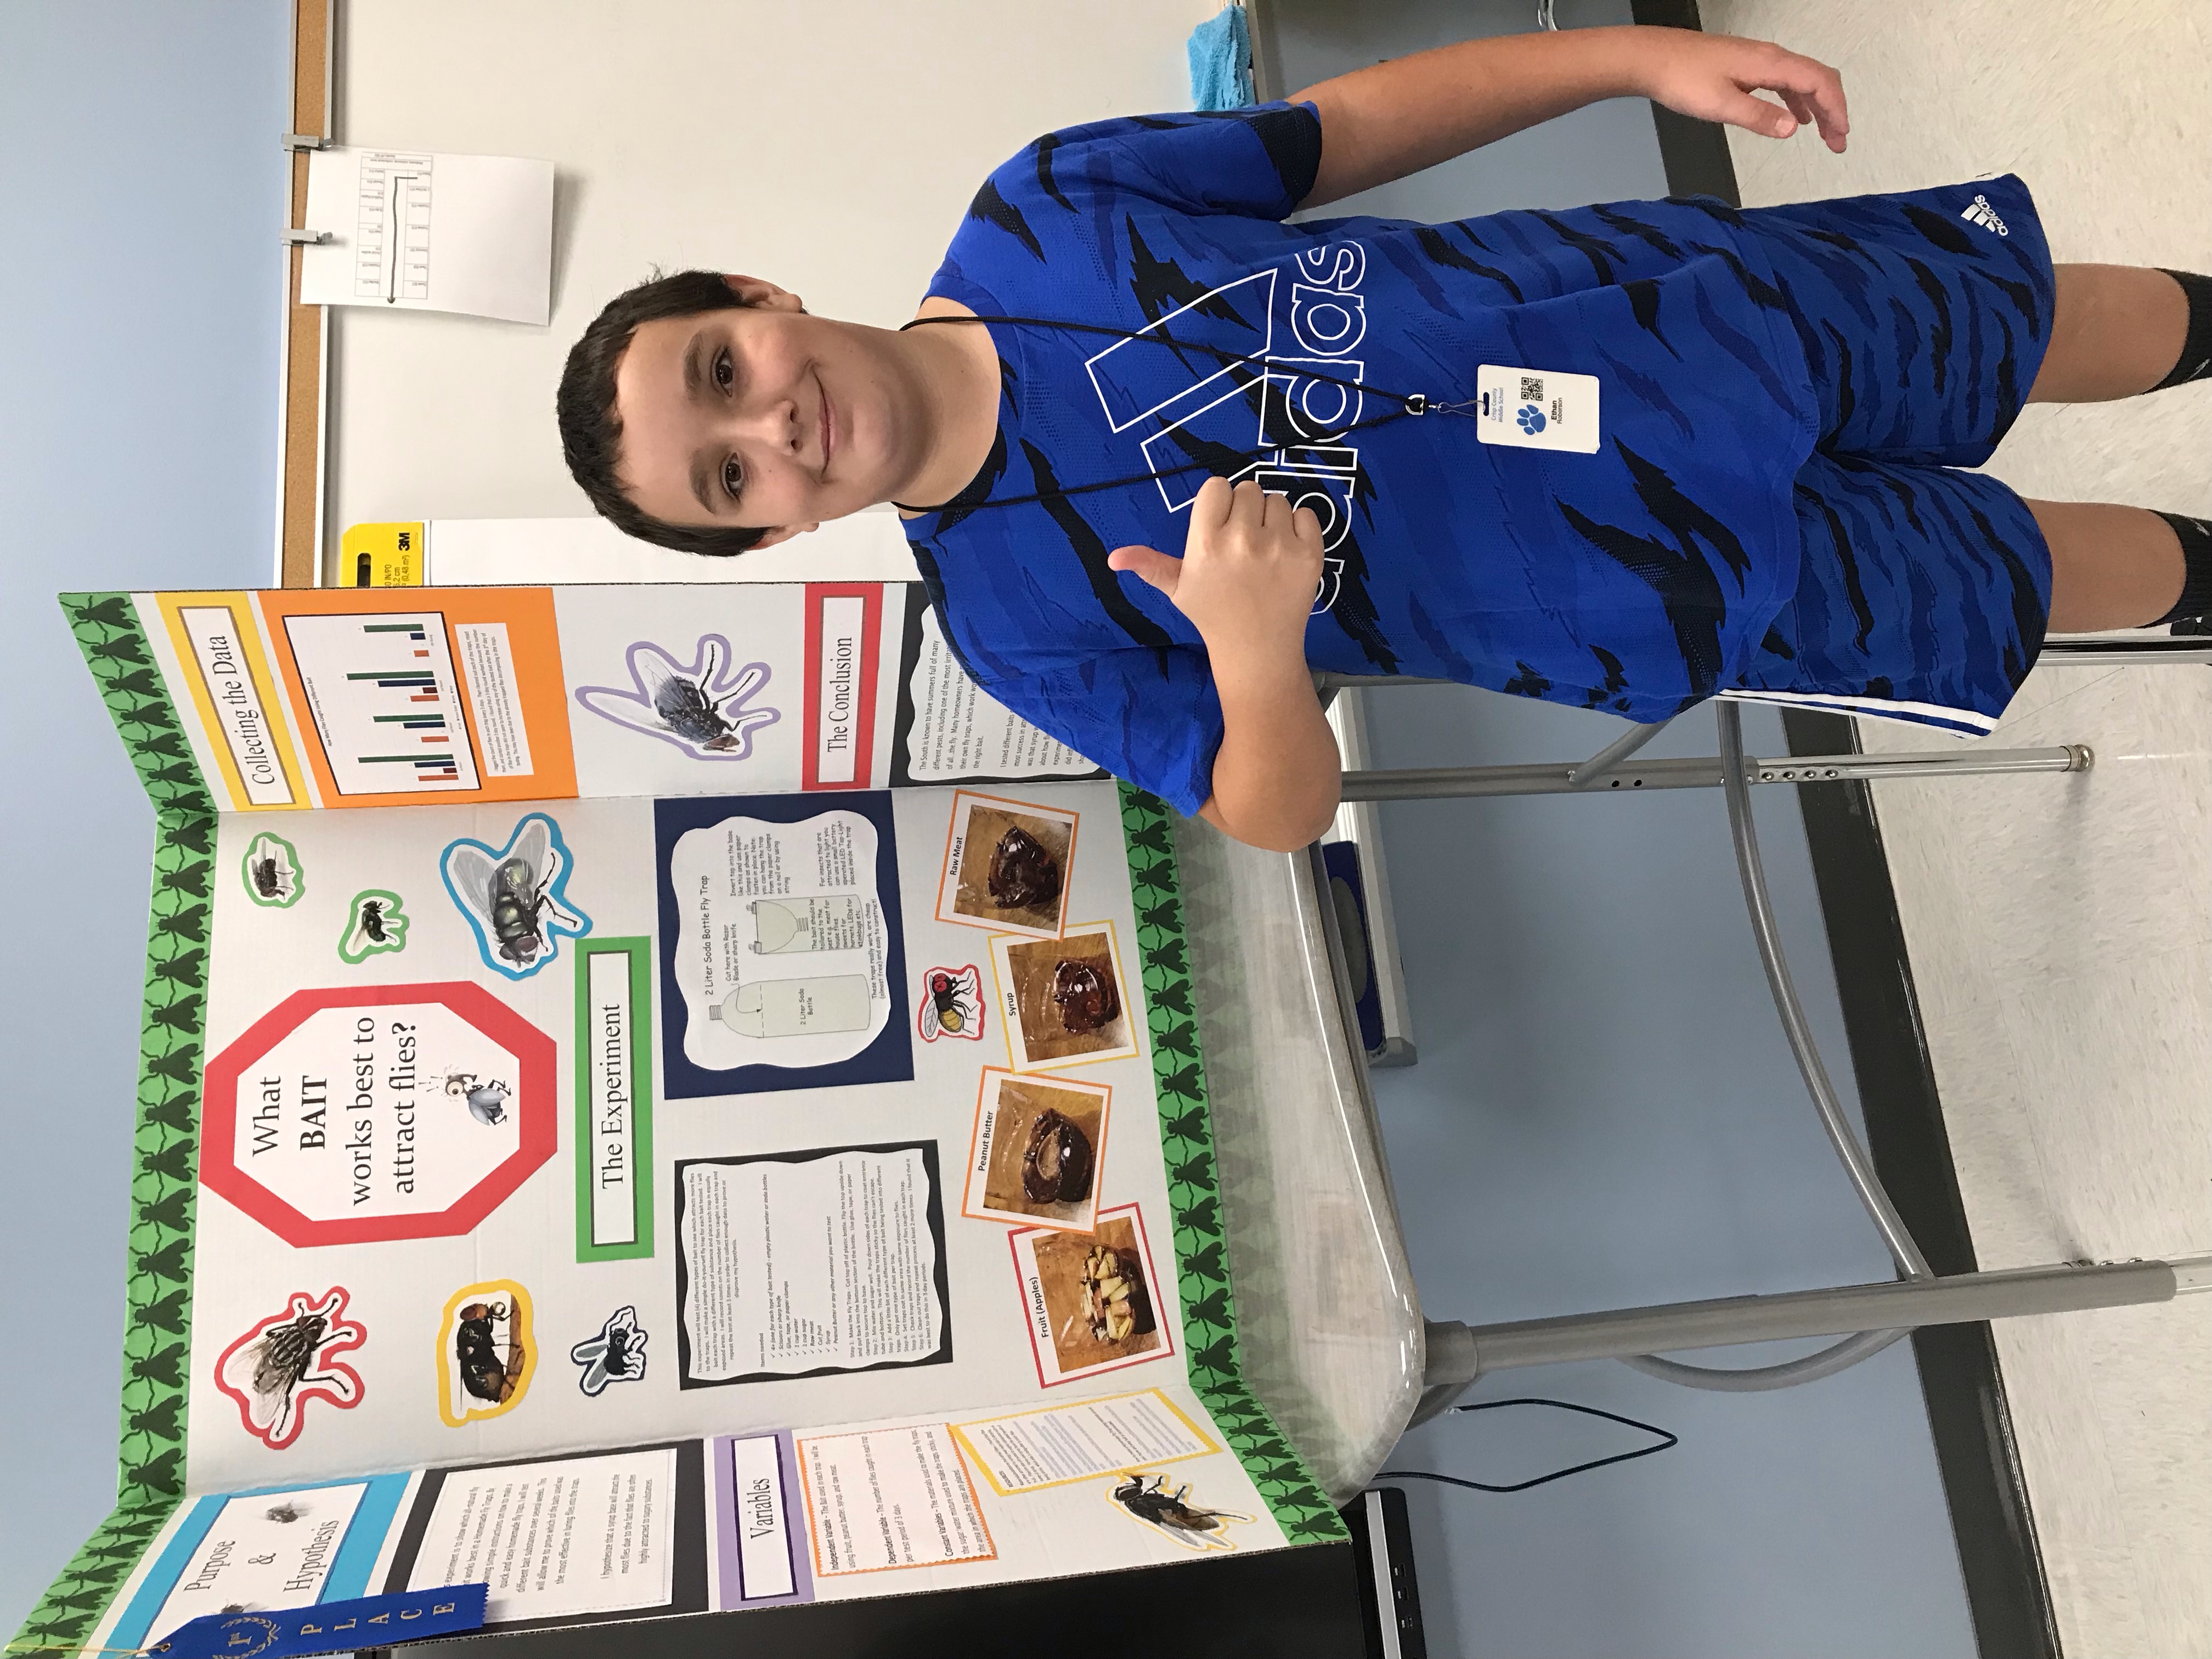 Ethan Roberson science fair project